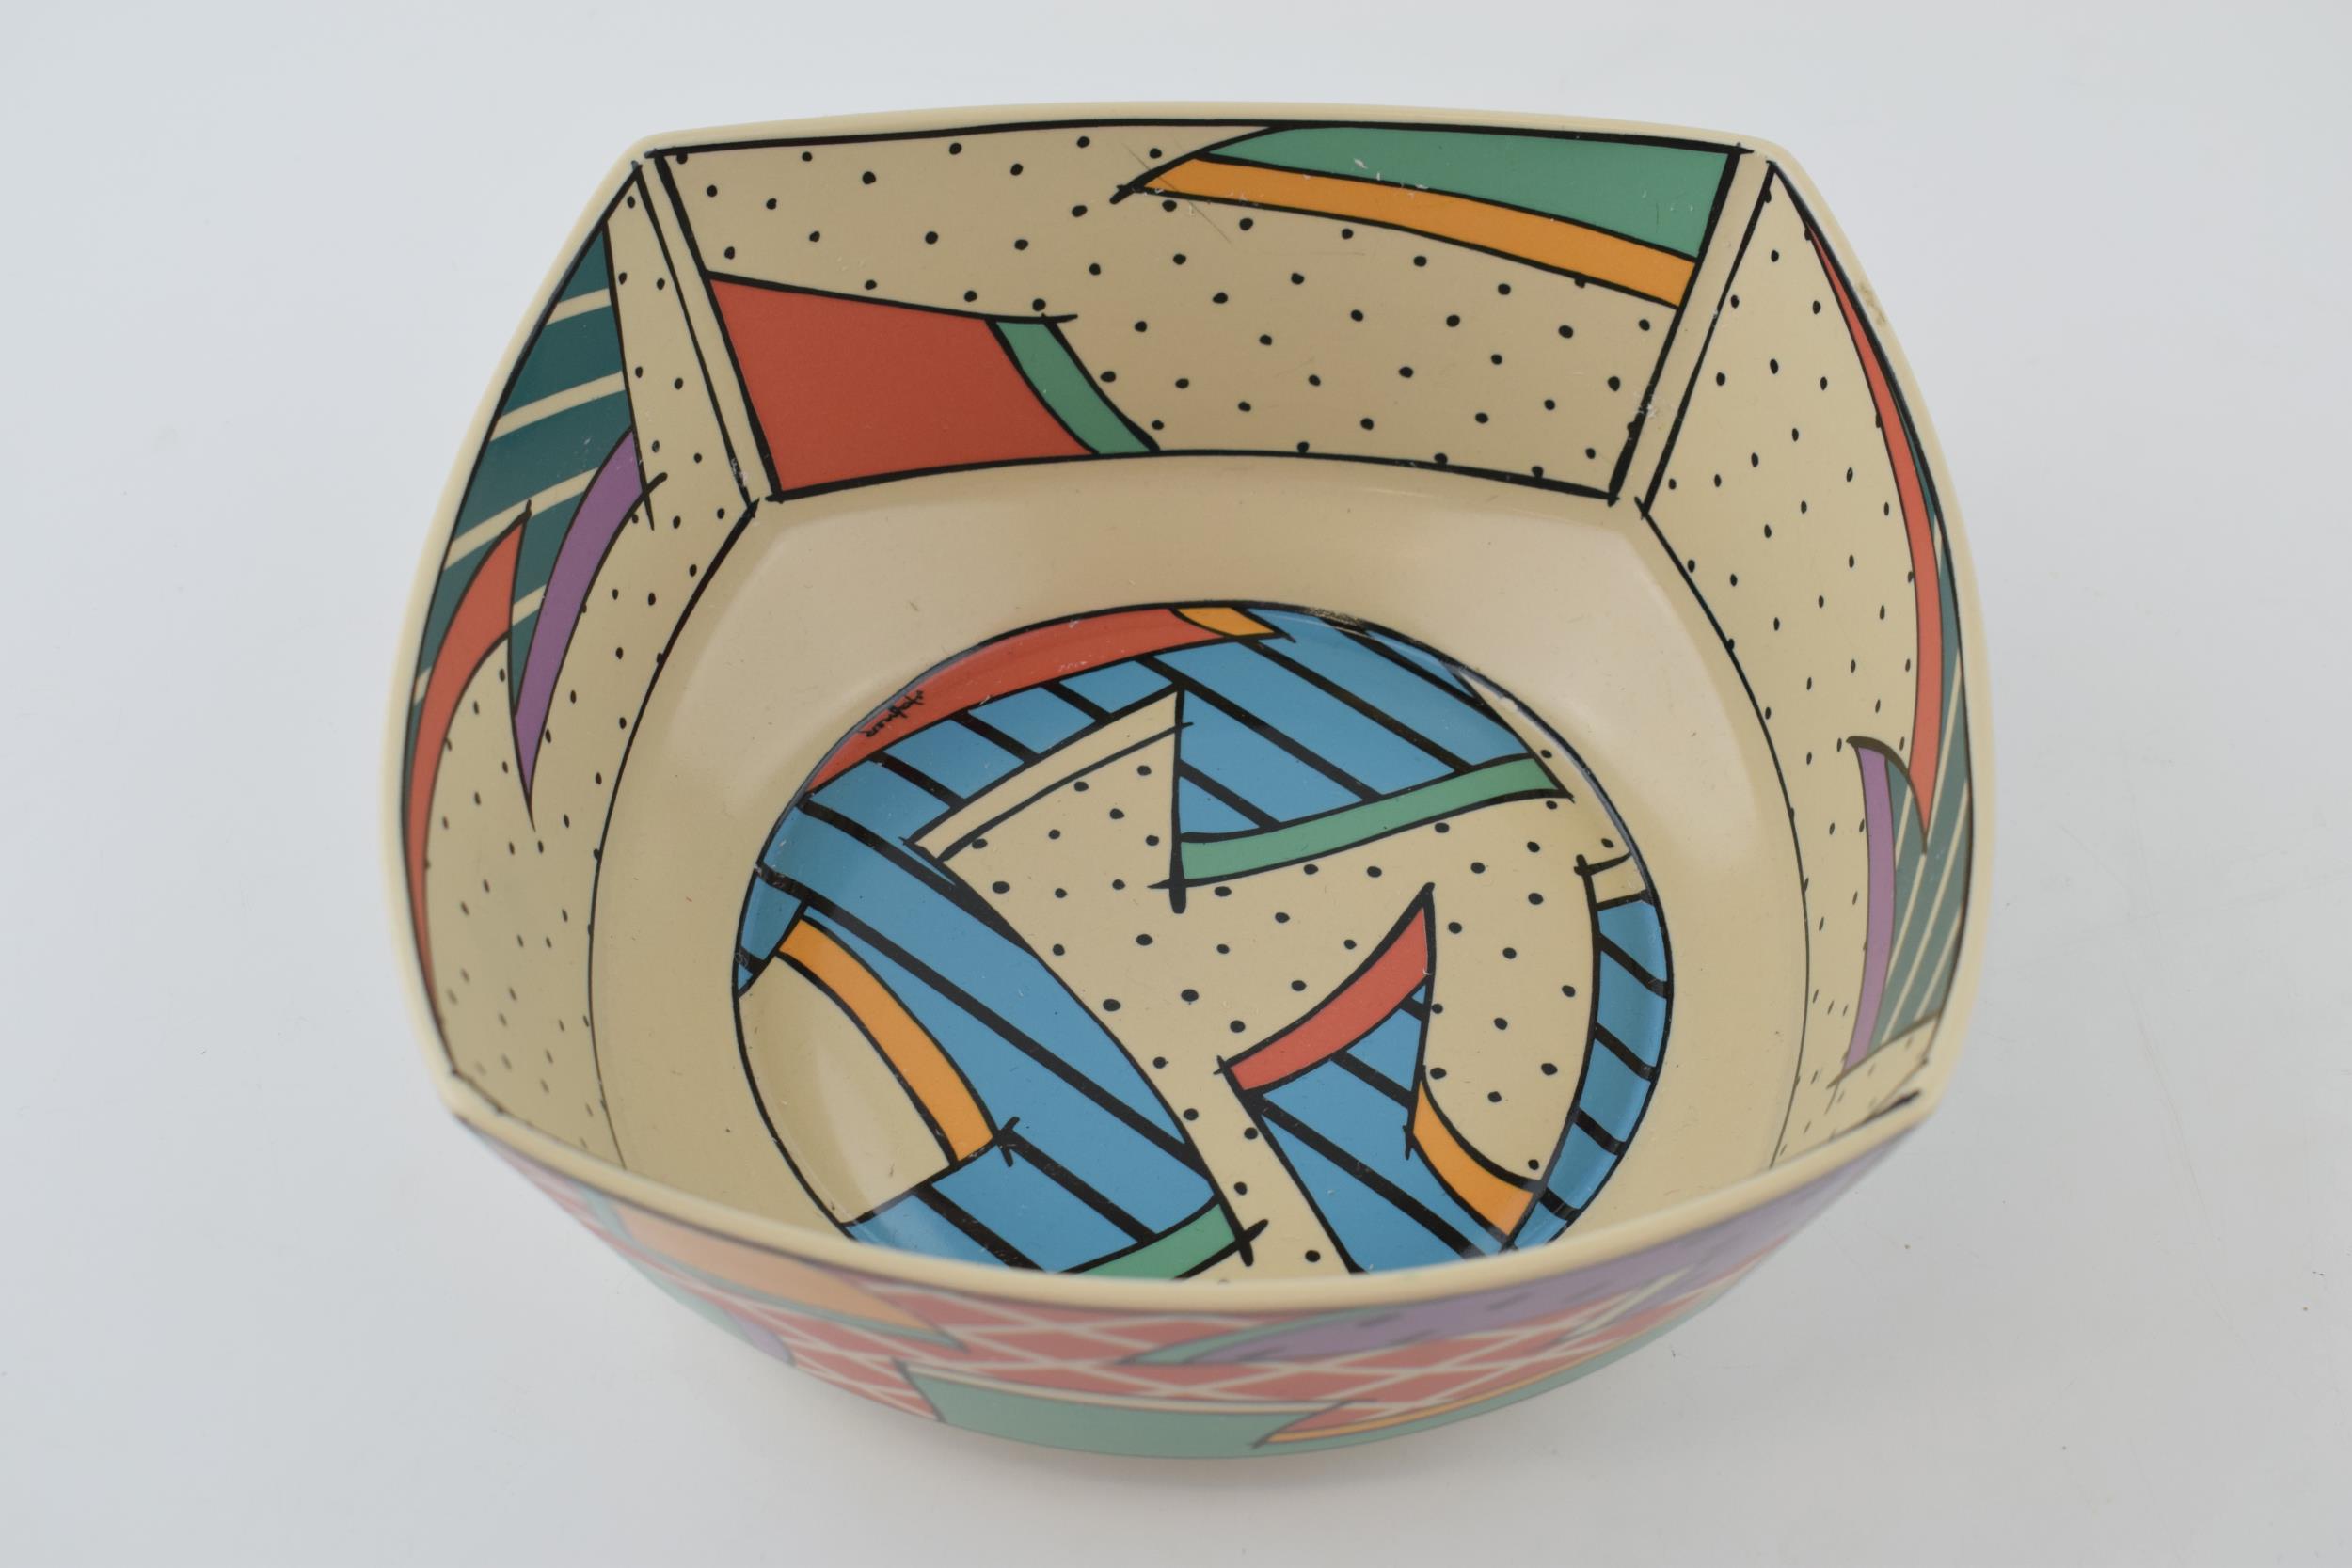 Rosenthal studio-linie 'Flash' bowl, 20.5cm wide. In good condition with no obvious damage or - Bild 2 aus 3